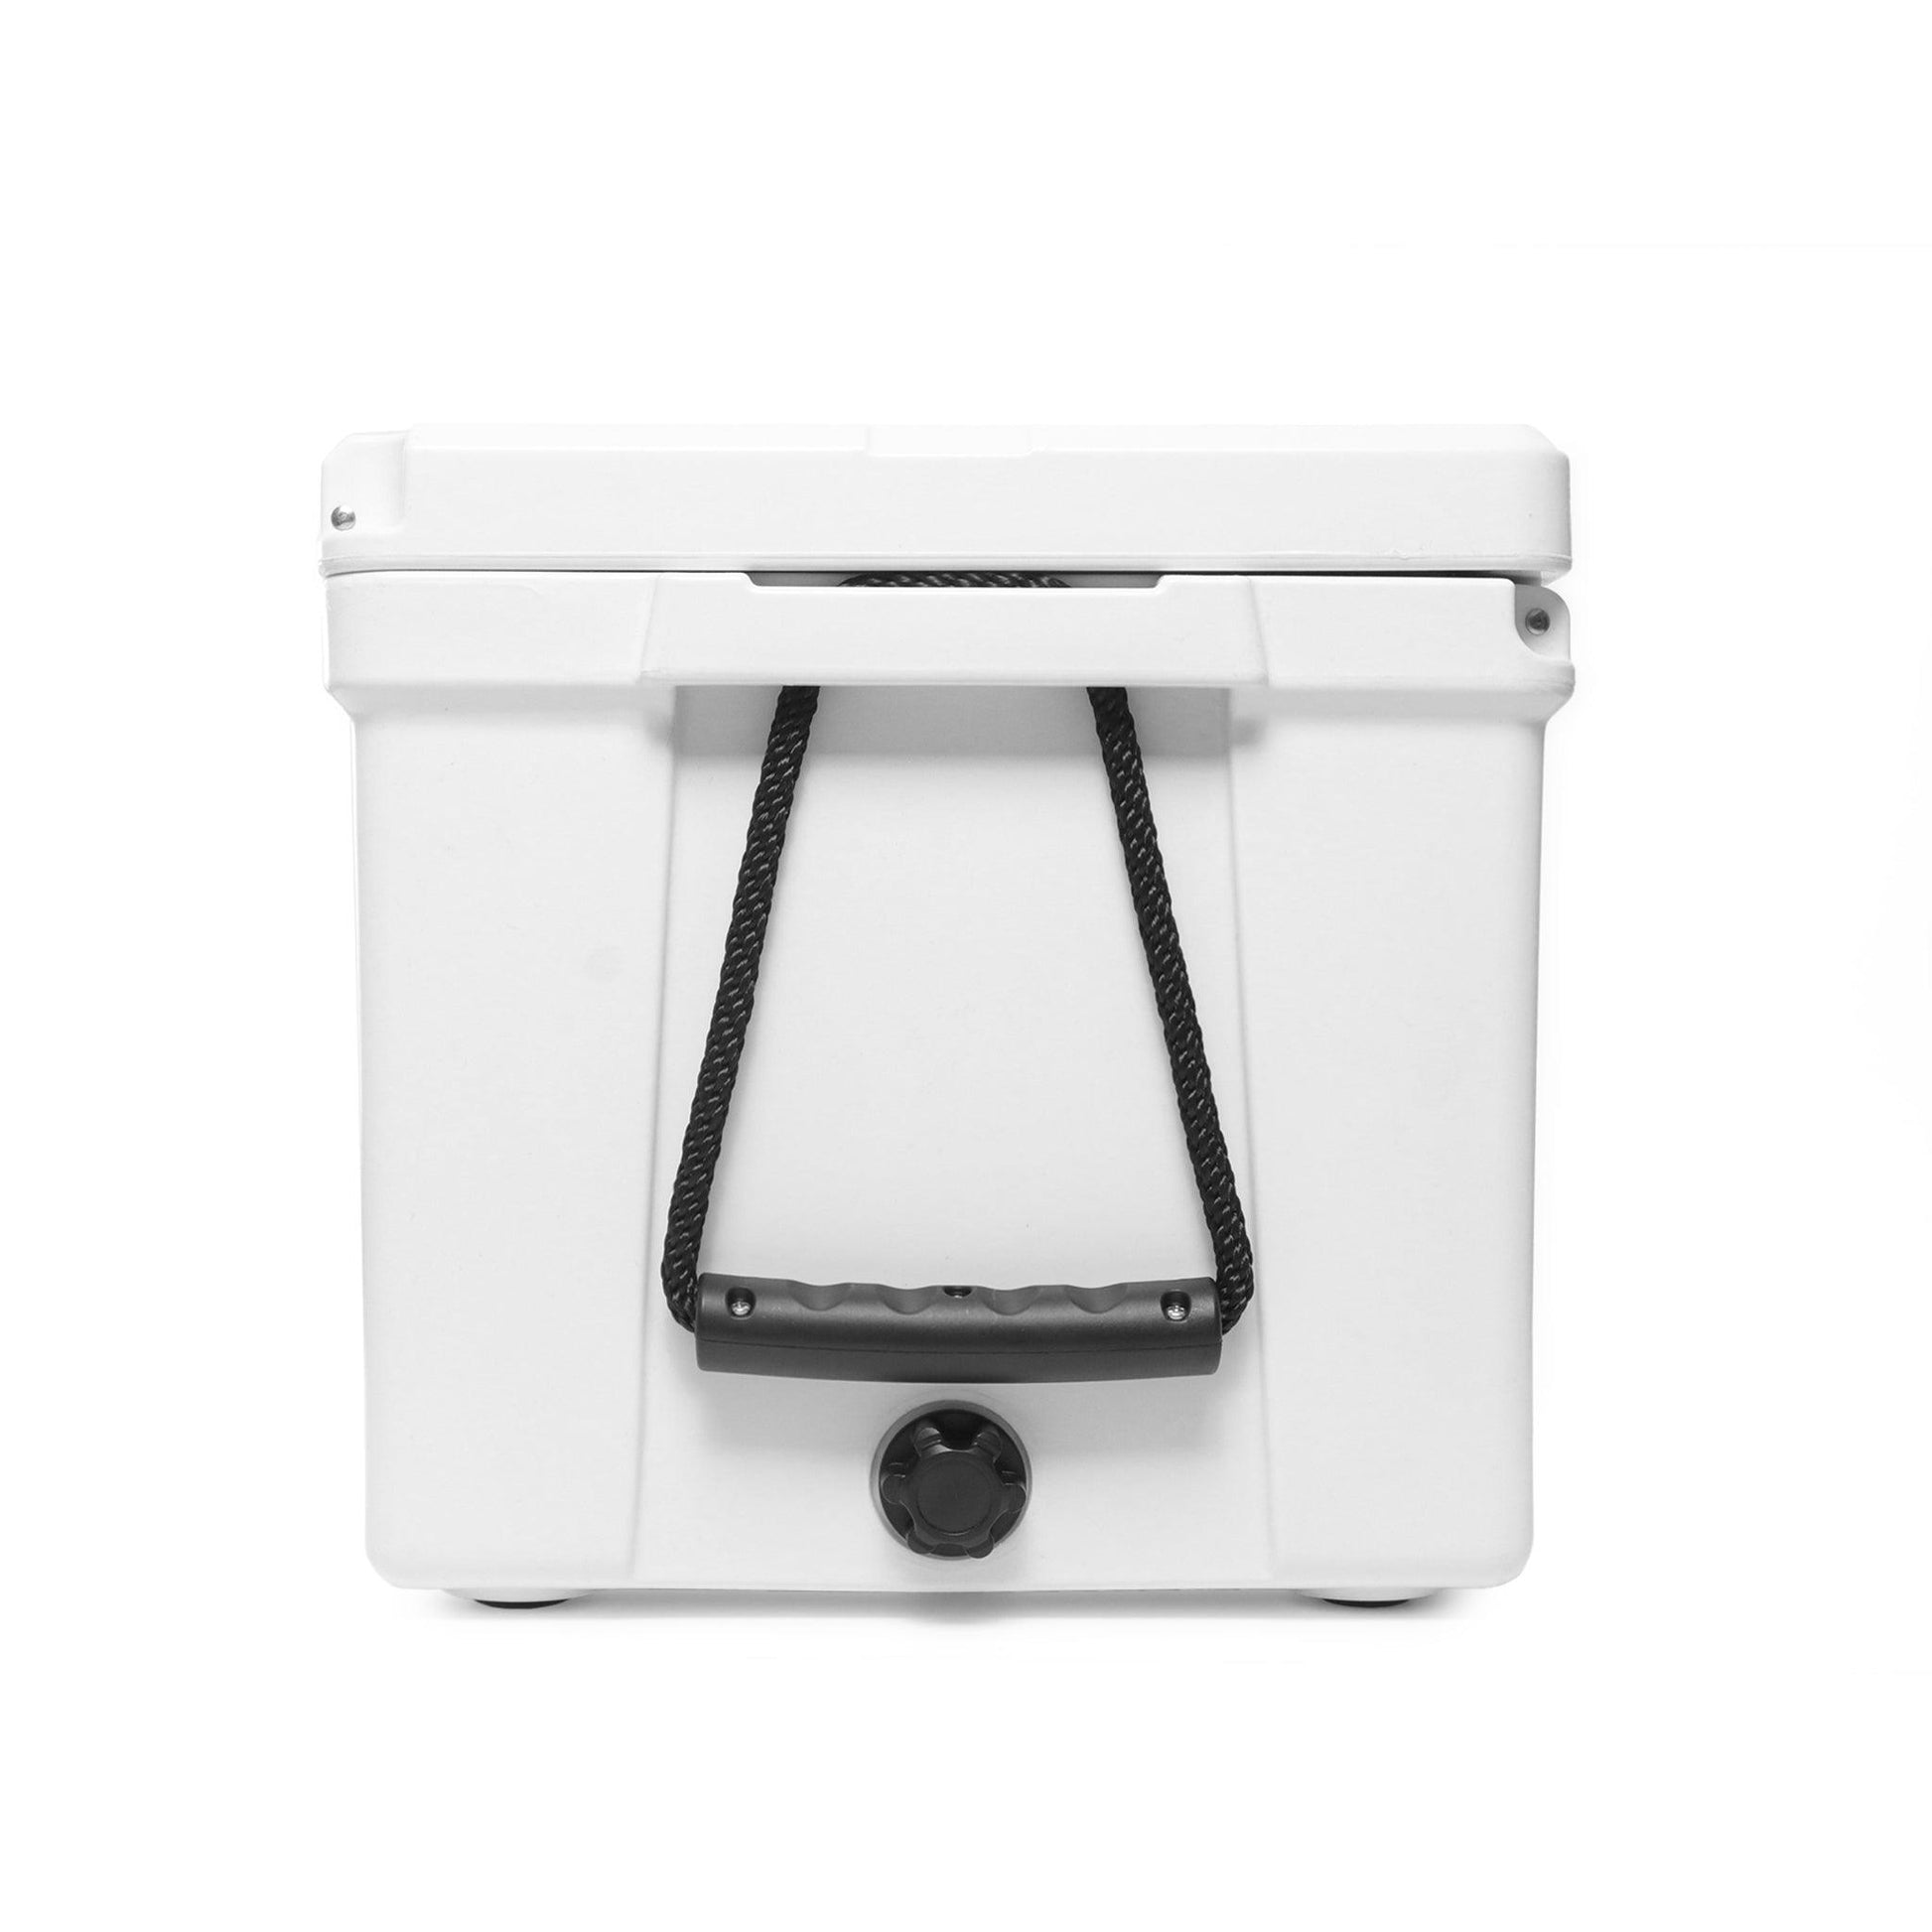 side of cooler with rope handle and drain plug